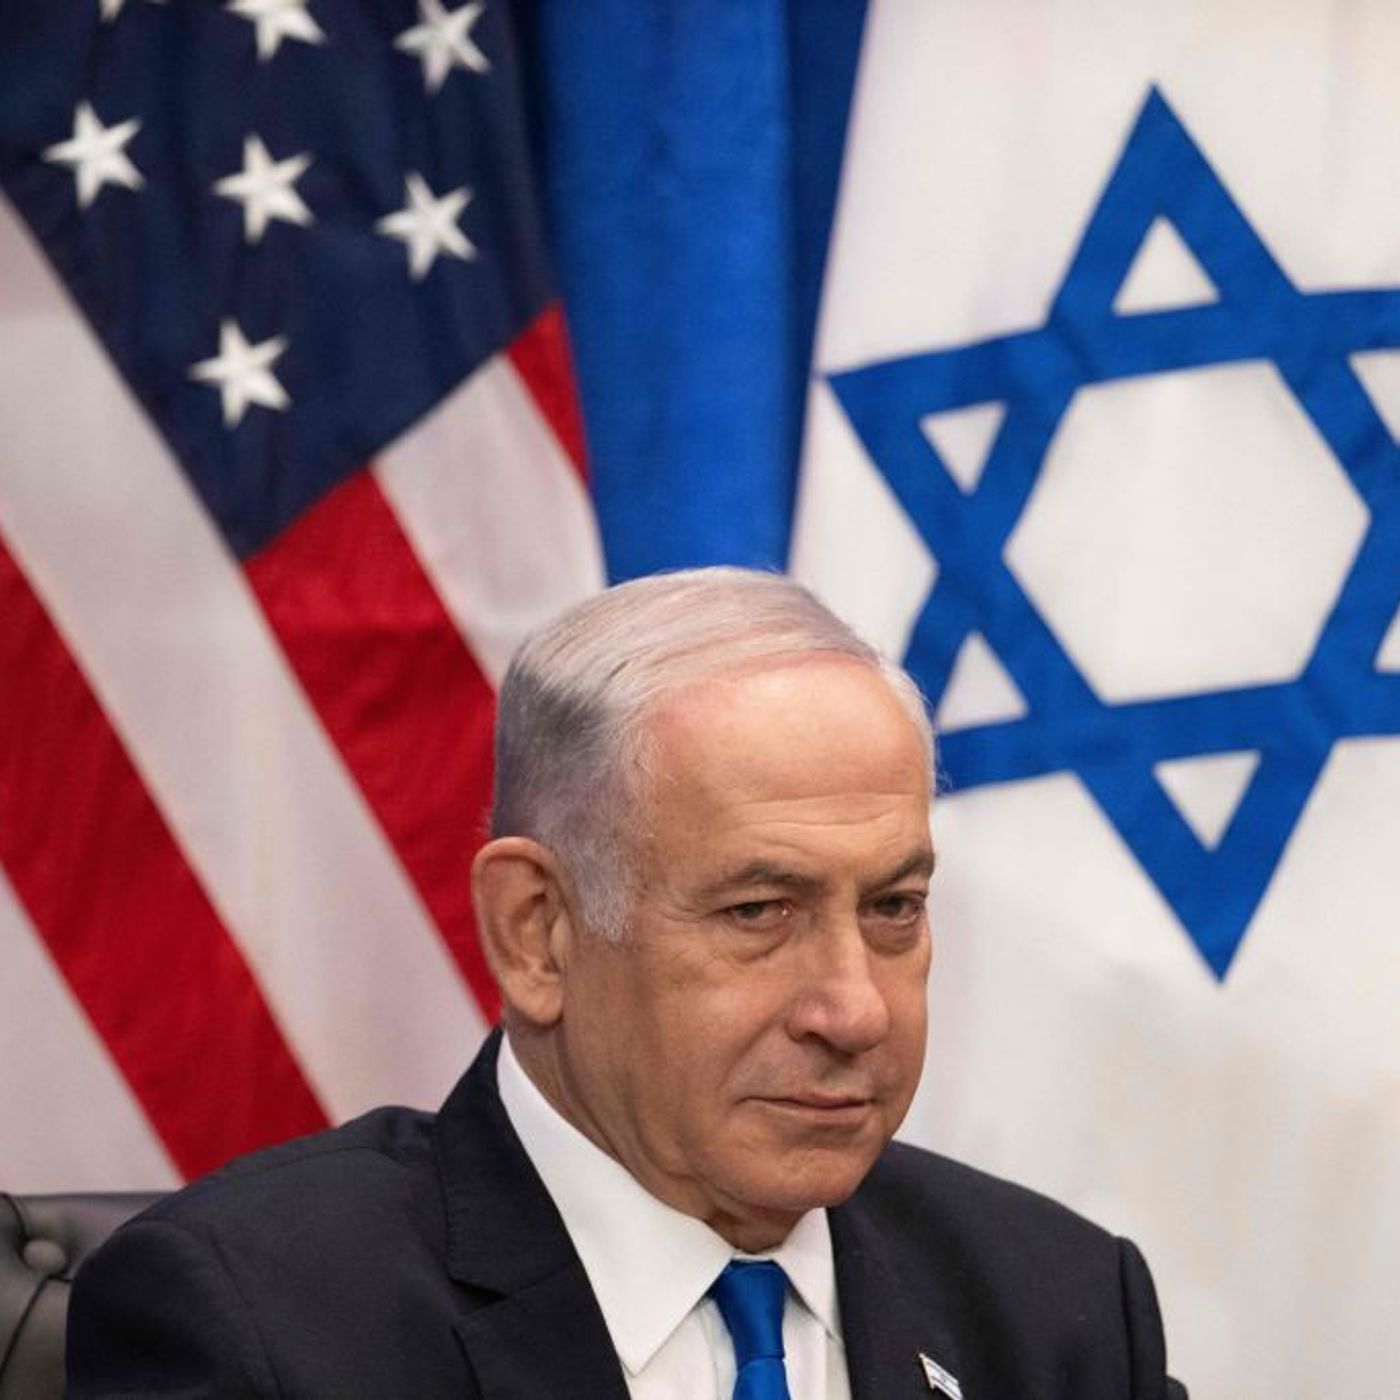 How are Democrats reacting to the war in Israel?